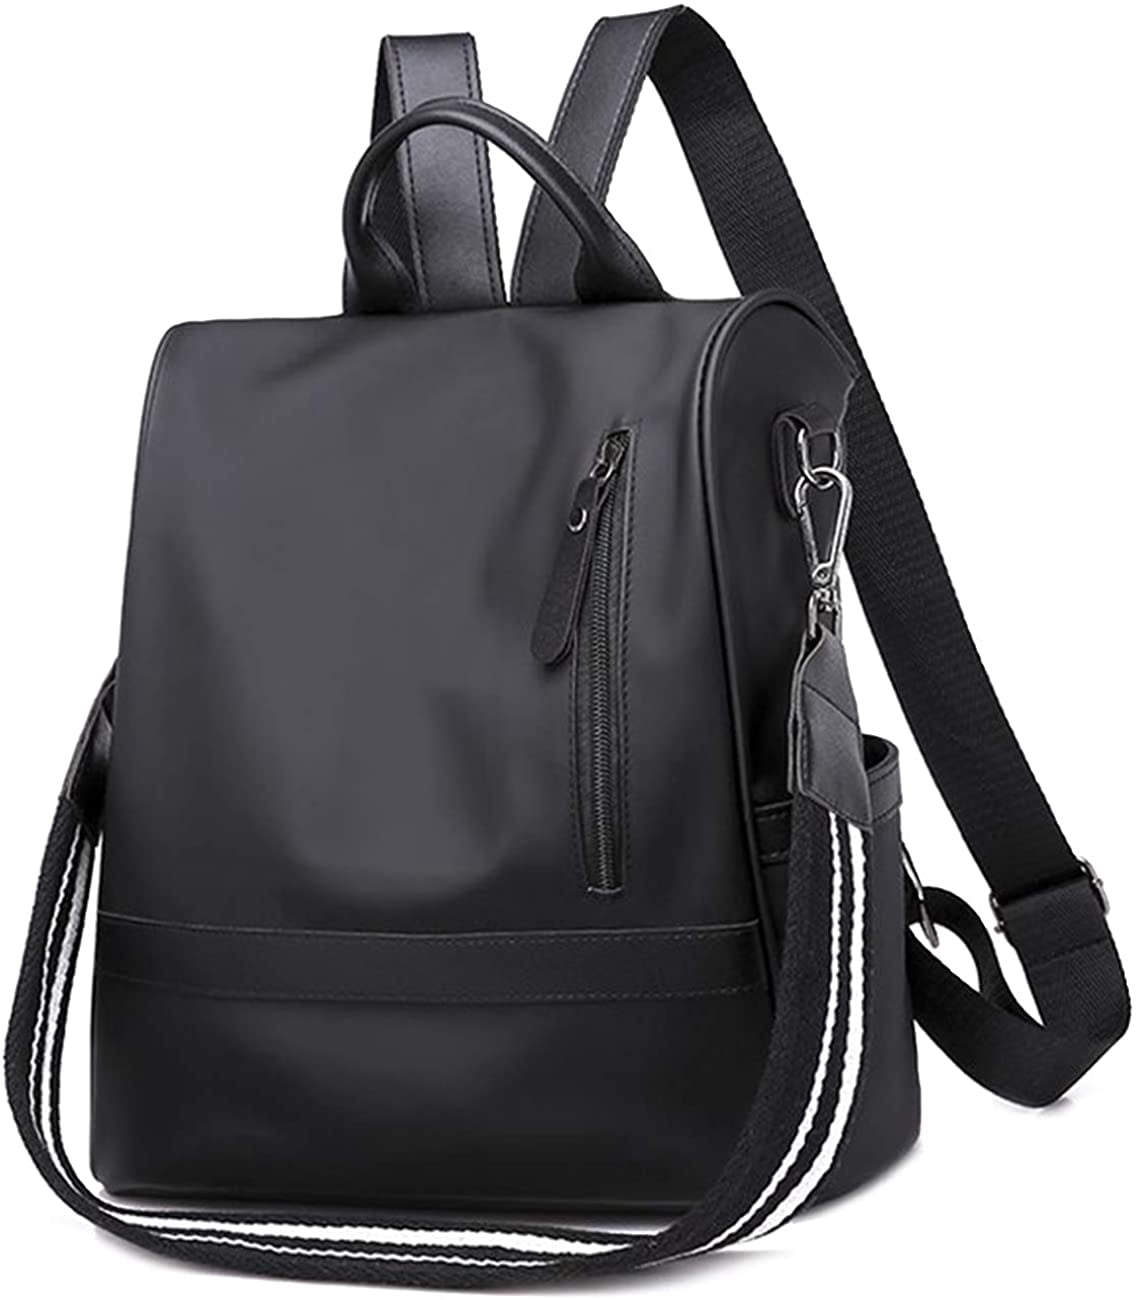  VASCHY Backpack Purse for Women, Fashion Square Small